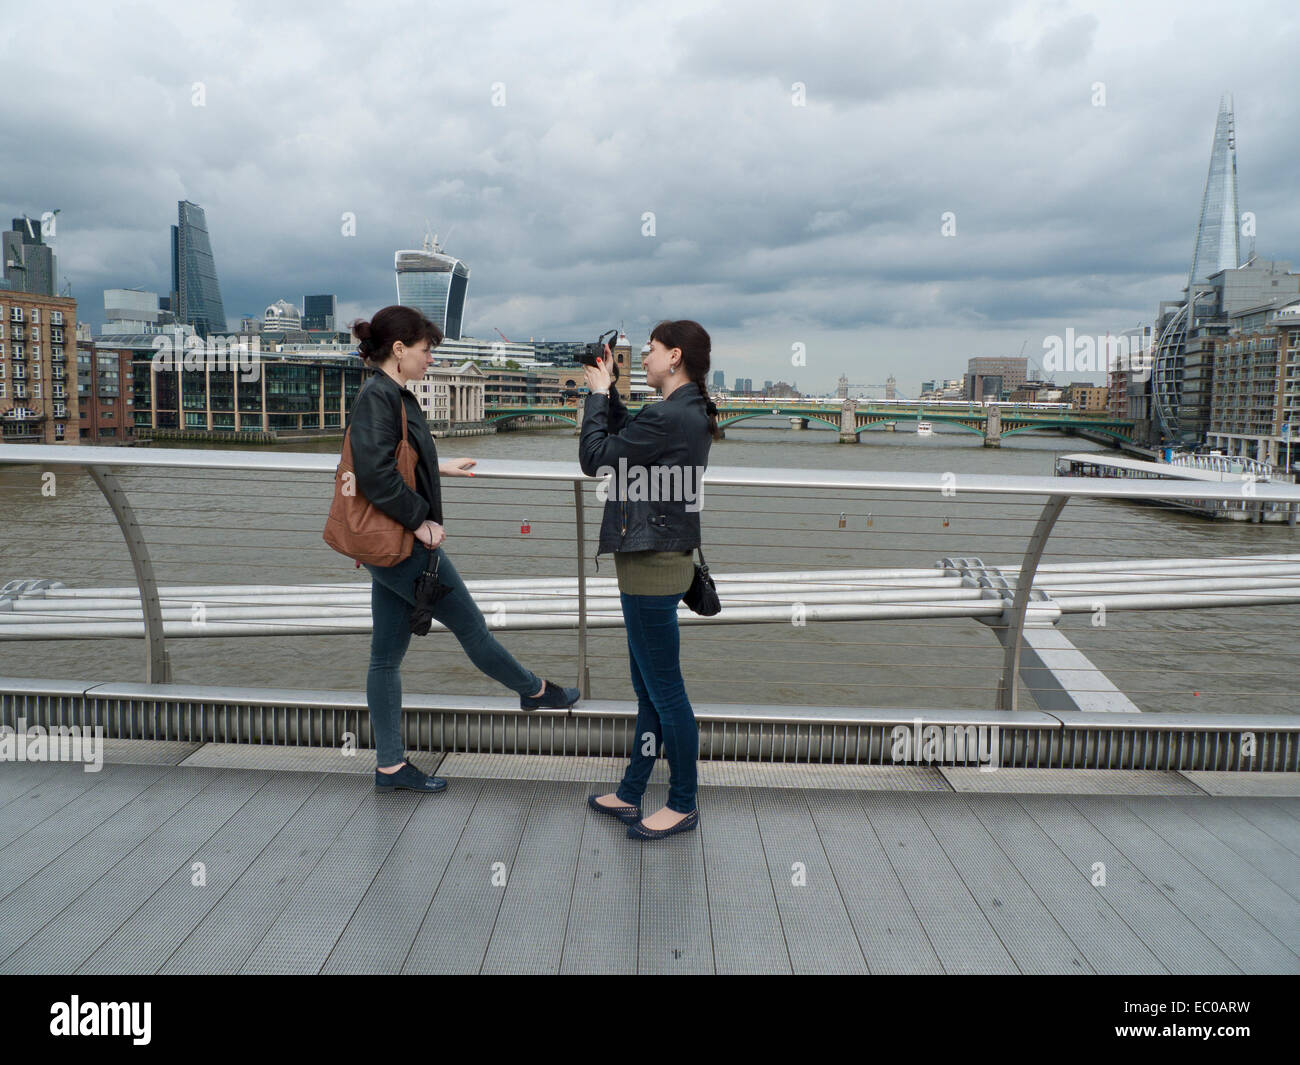 A young woman photographing her friend on the Millennium Bridge over the River Thames in London UK  KATHY DEWITT Stock Photo